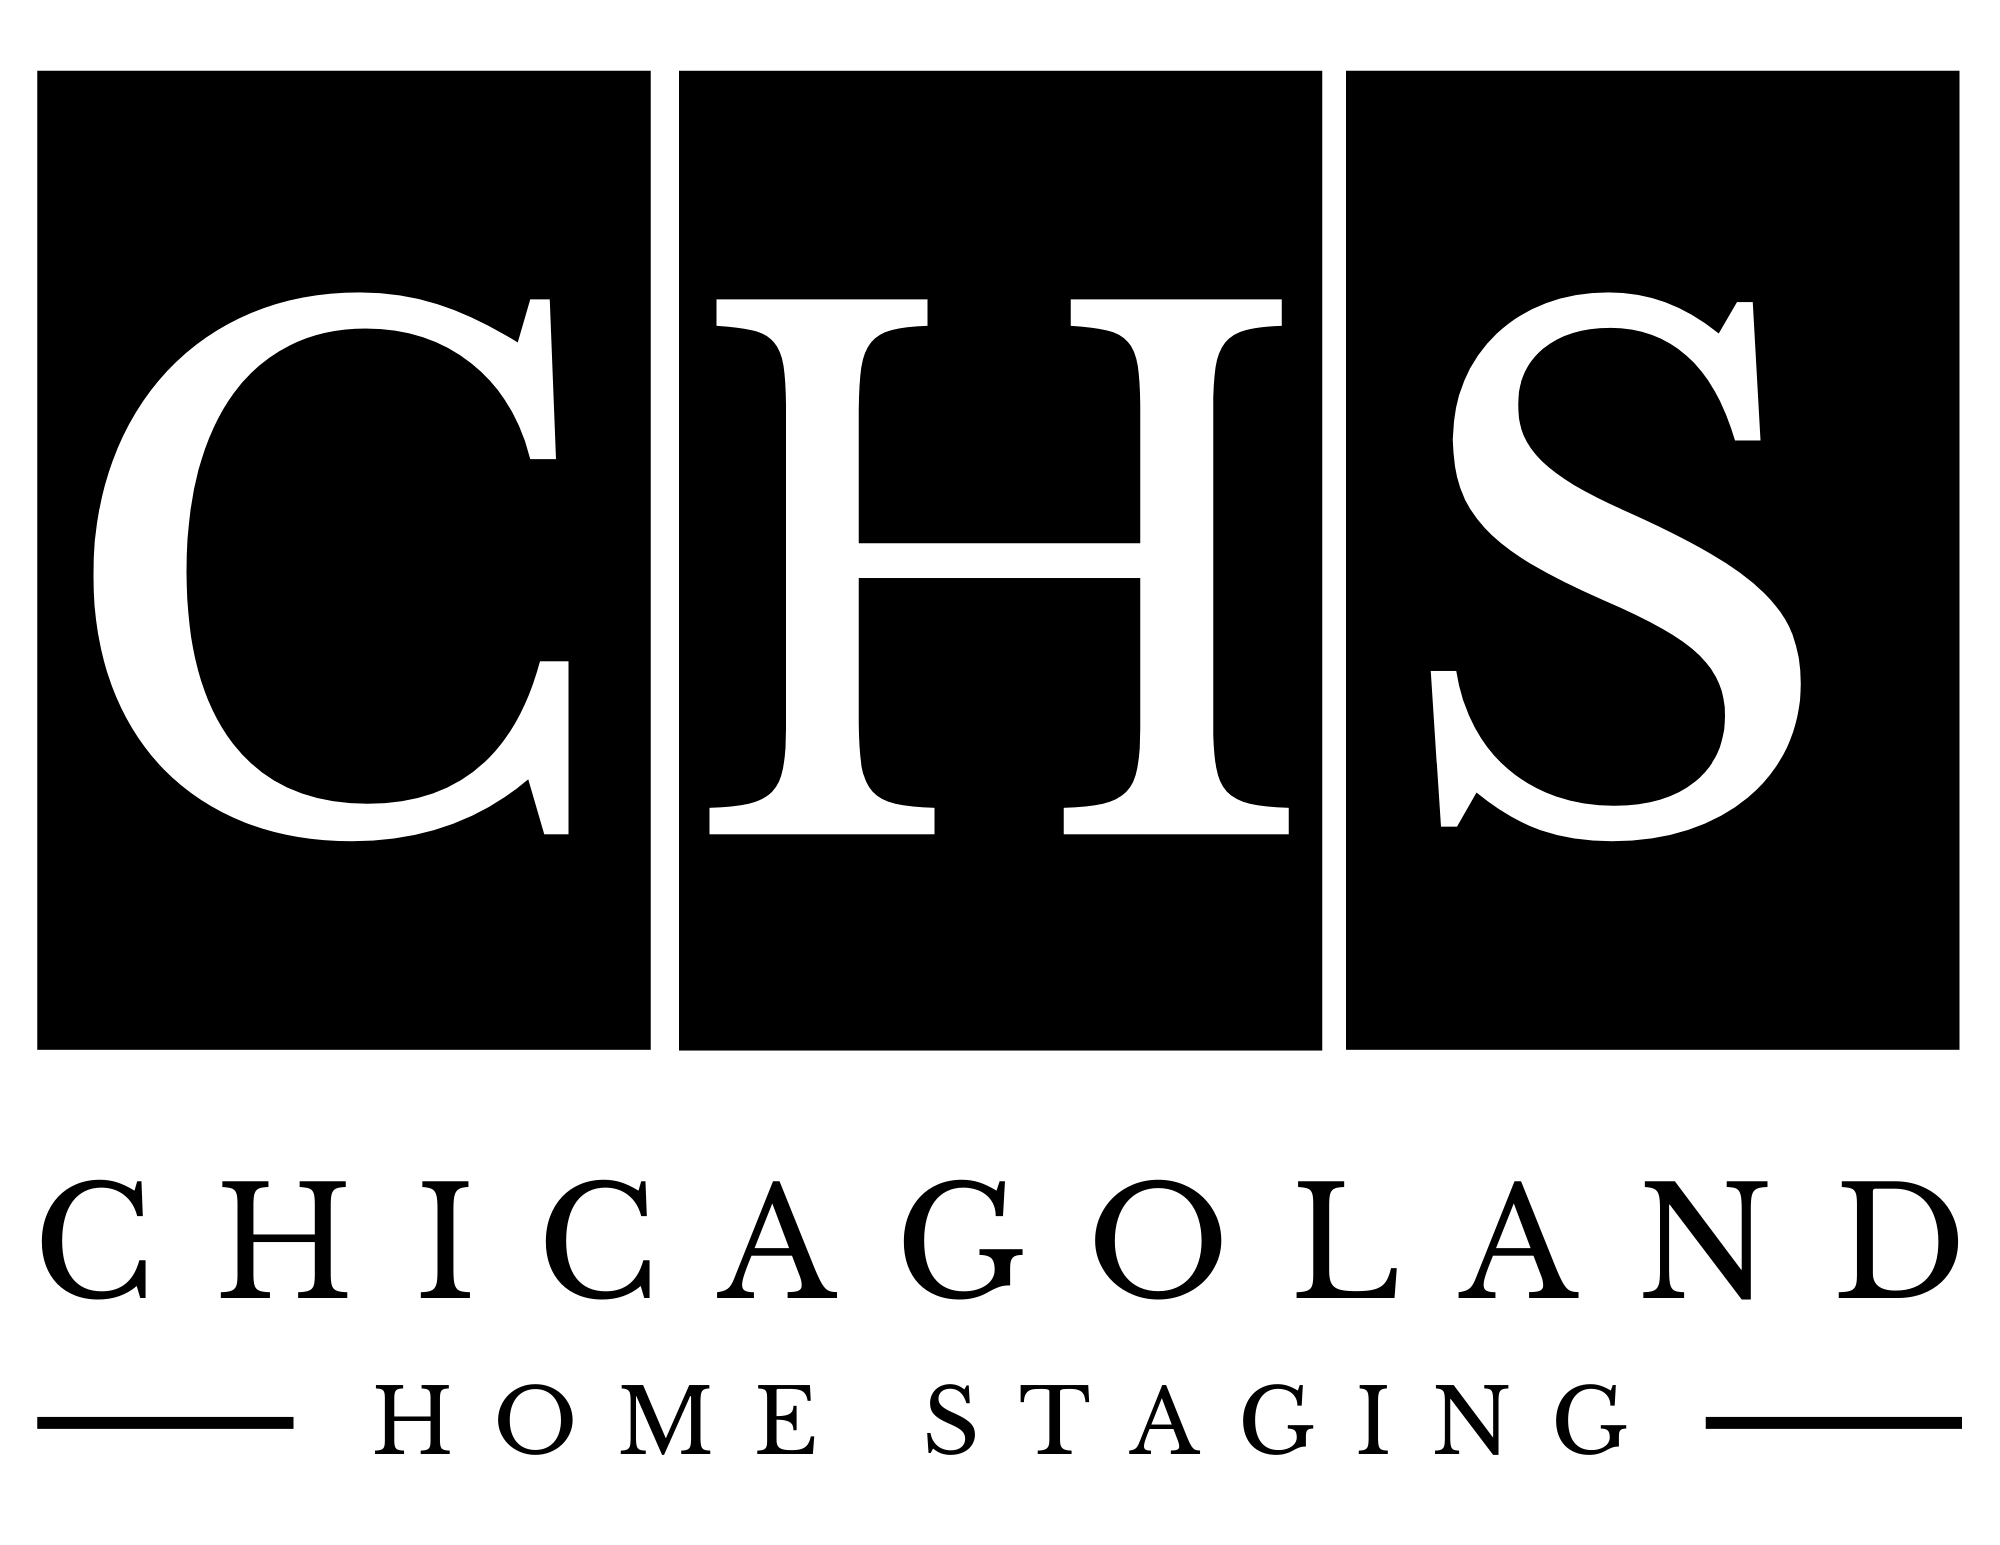 Chicagoland Home Staging: Silver Sponsor